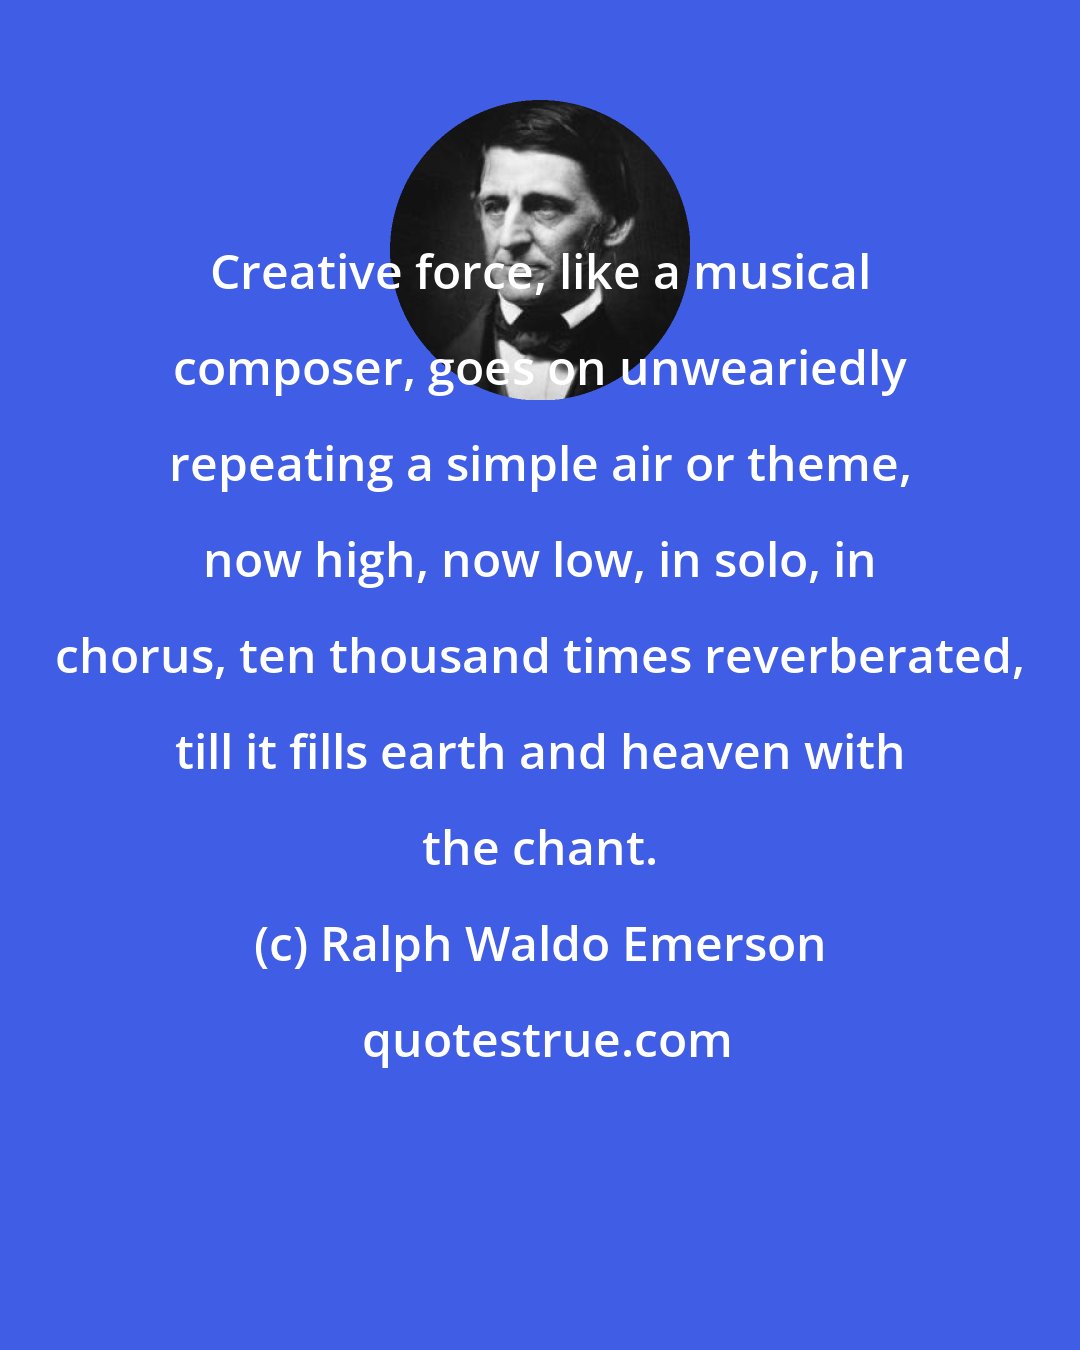 Ralph Waldo Emerson: Creative force, like a musical composer, goes on unweariedly repeating a simple air or theme, now high, now low, in solo, in chorus, ten thousand times reverberated, till it fills earth and heaven with the chant.